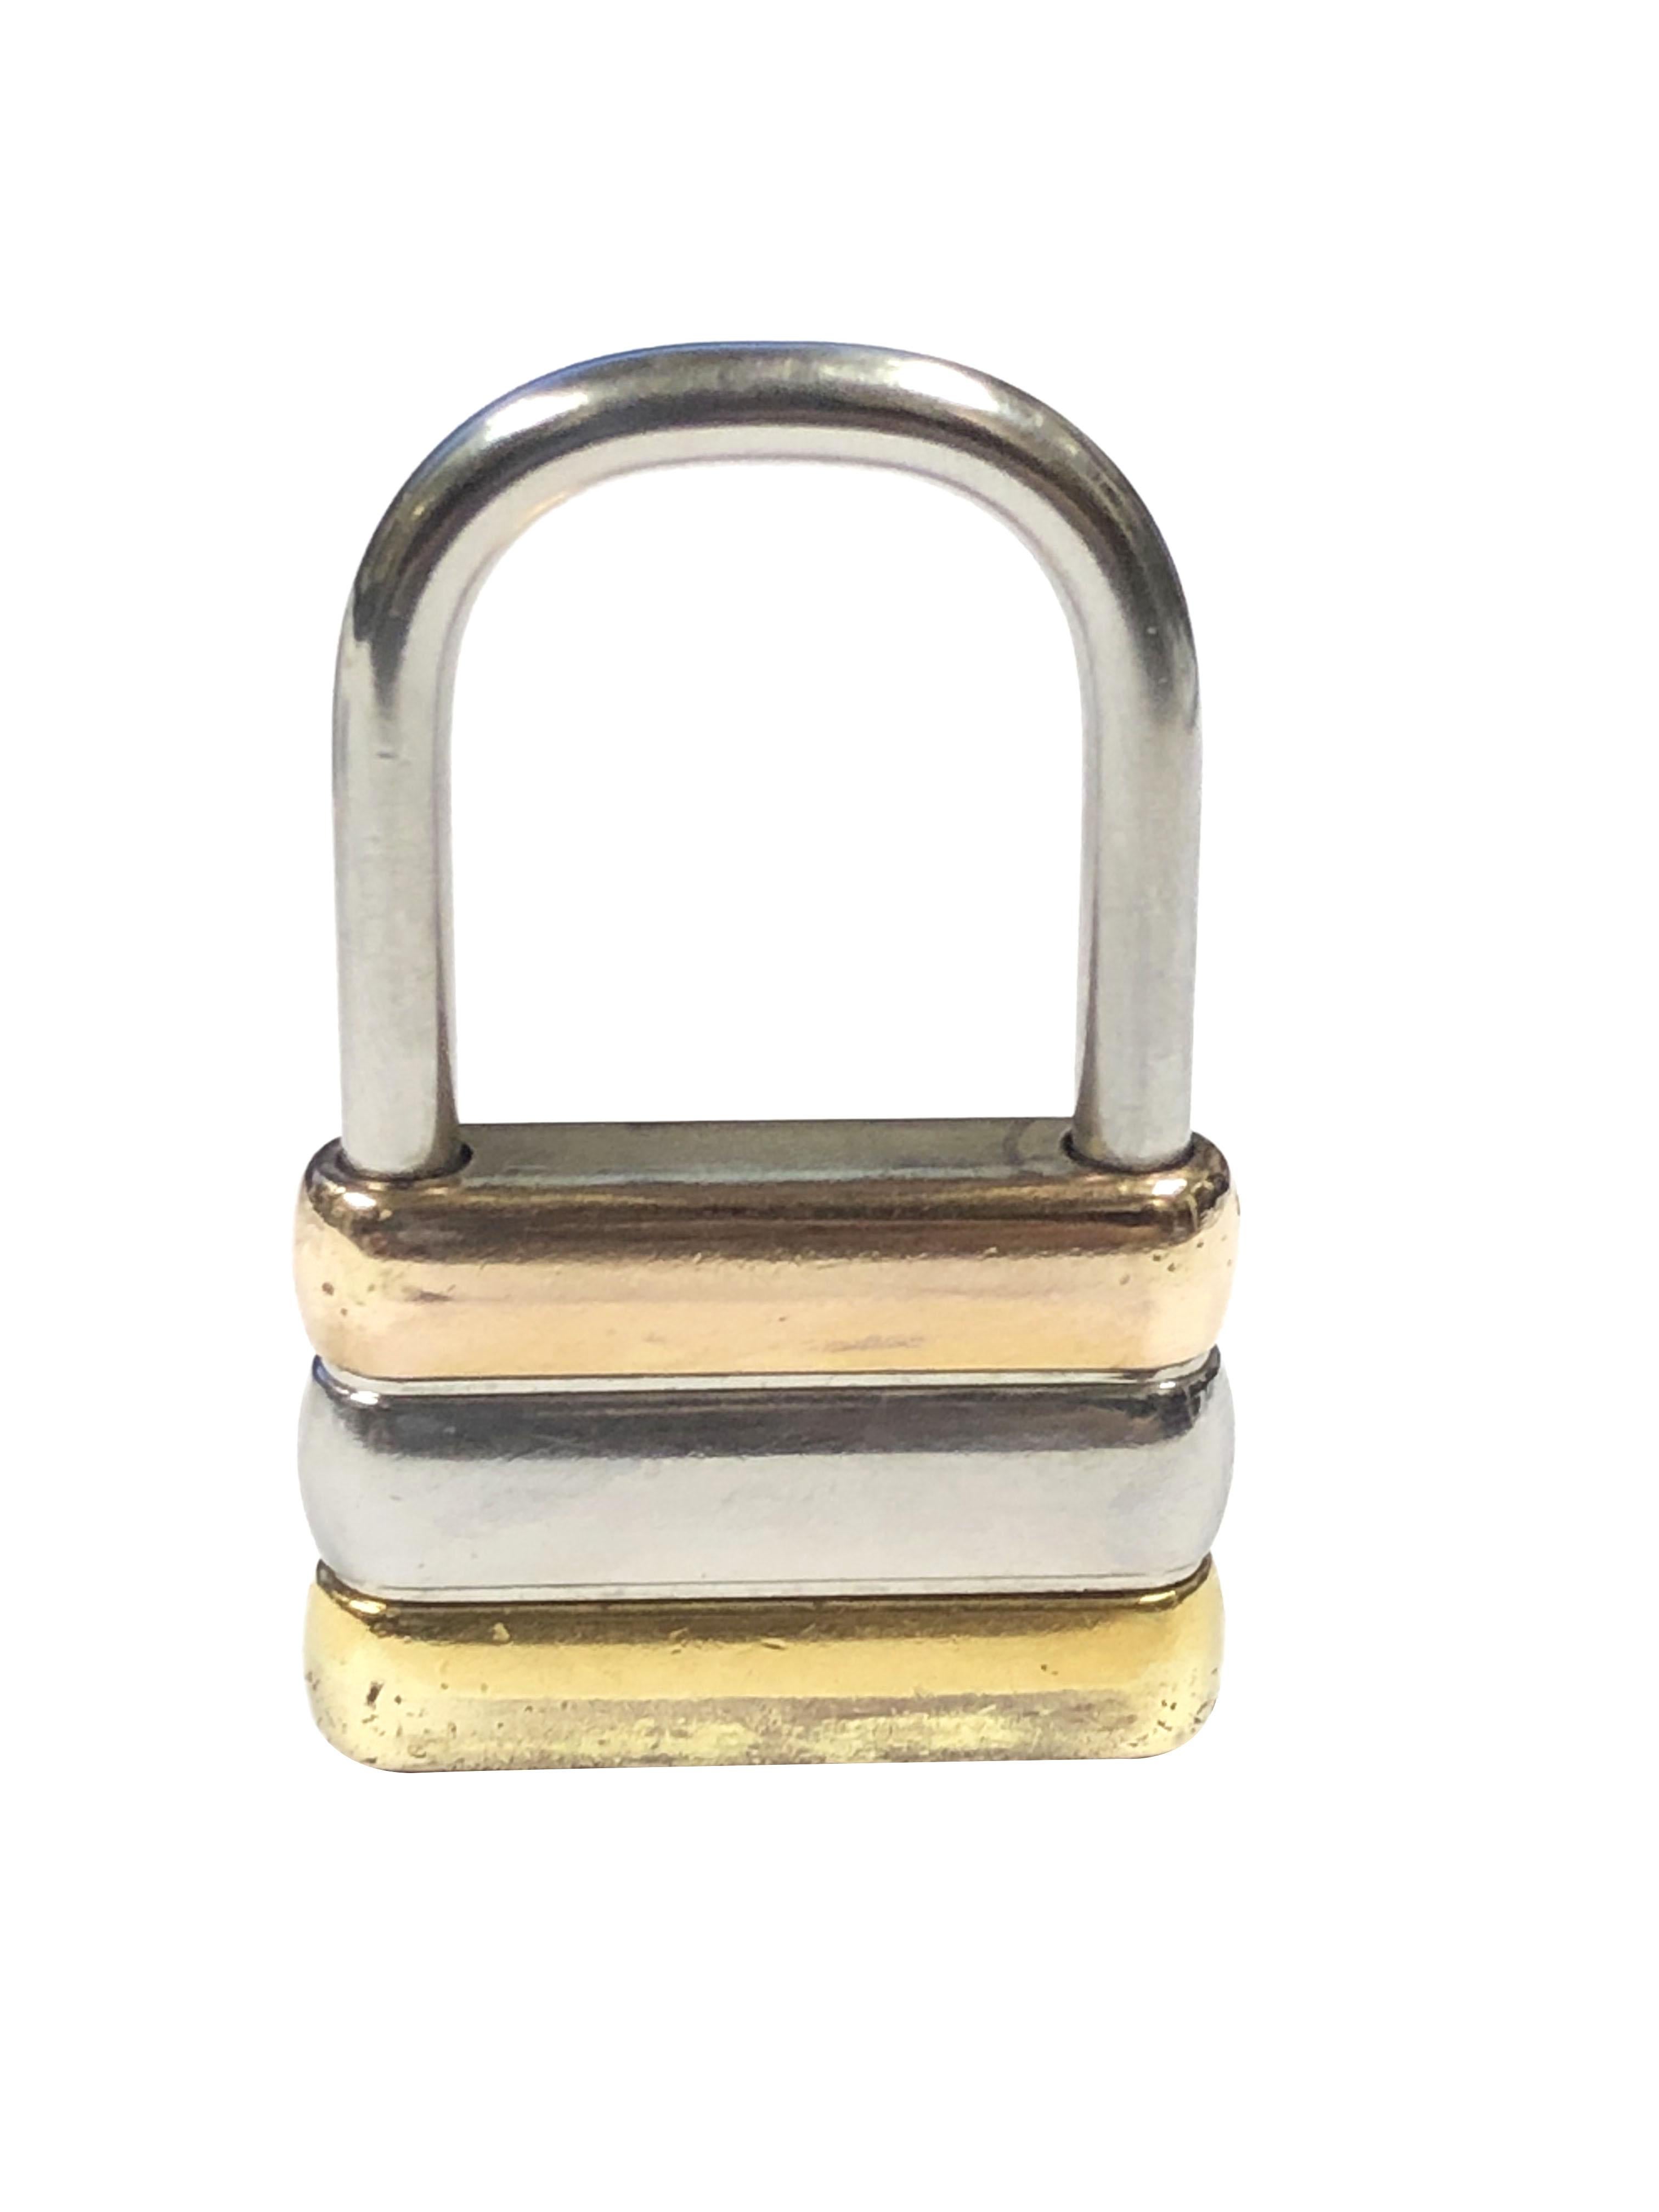 Circa 1980 Cartier Pad Lock Key Ring, measuring 1 7/8 inches in length X 1 1/8 inches, Rose, Yellow and White Gold Plated. Comes in original Cartier felt pouch.